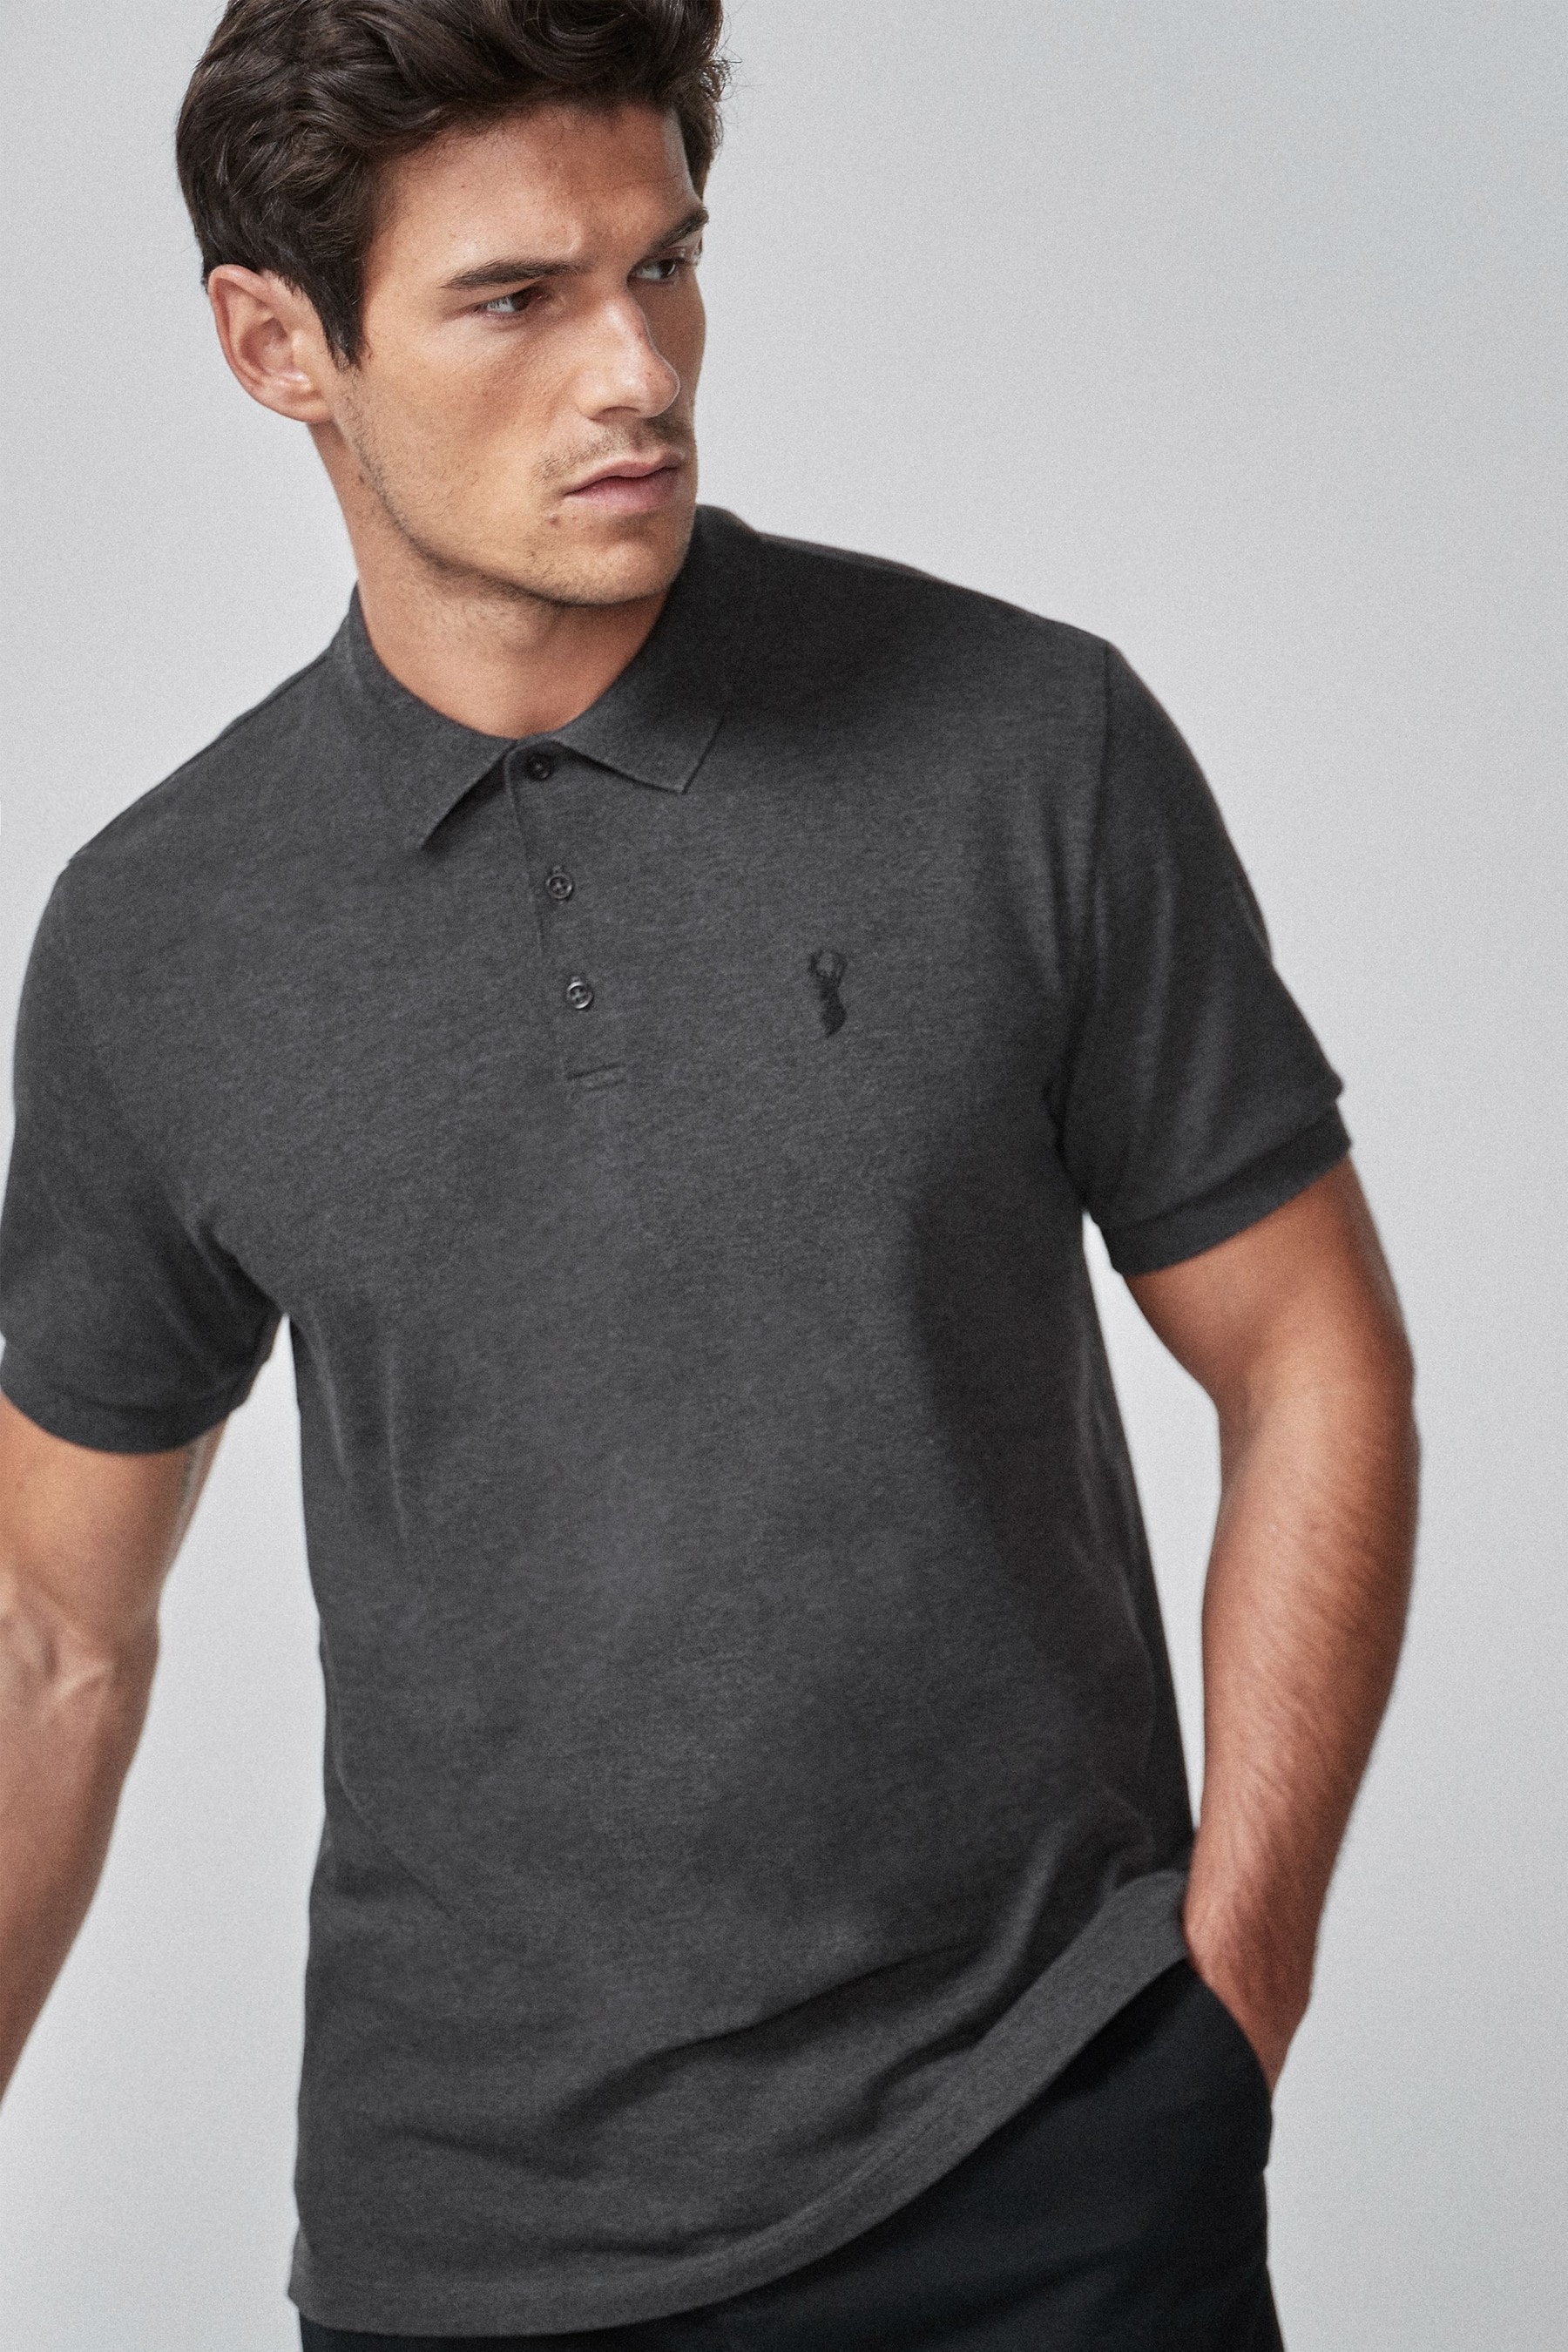 Buy Charcoal Grey Pique Polo Shirt from the Next UK online shop